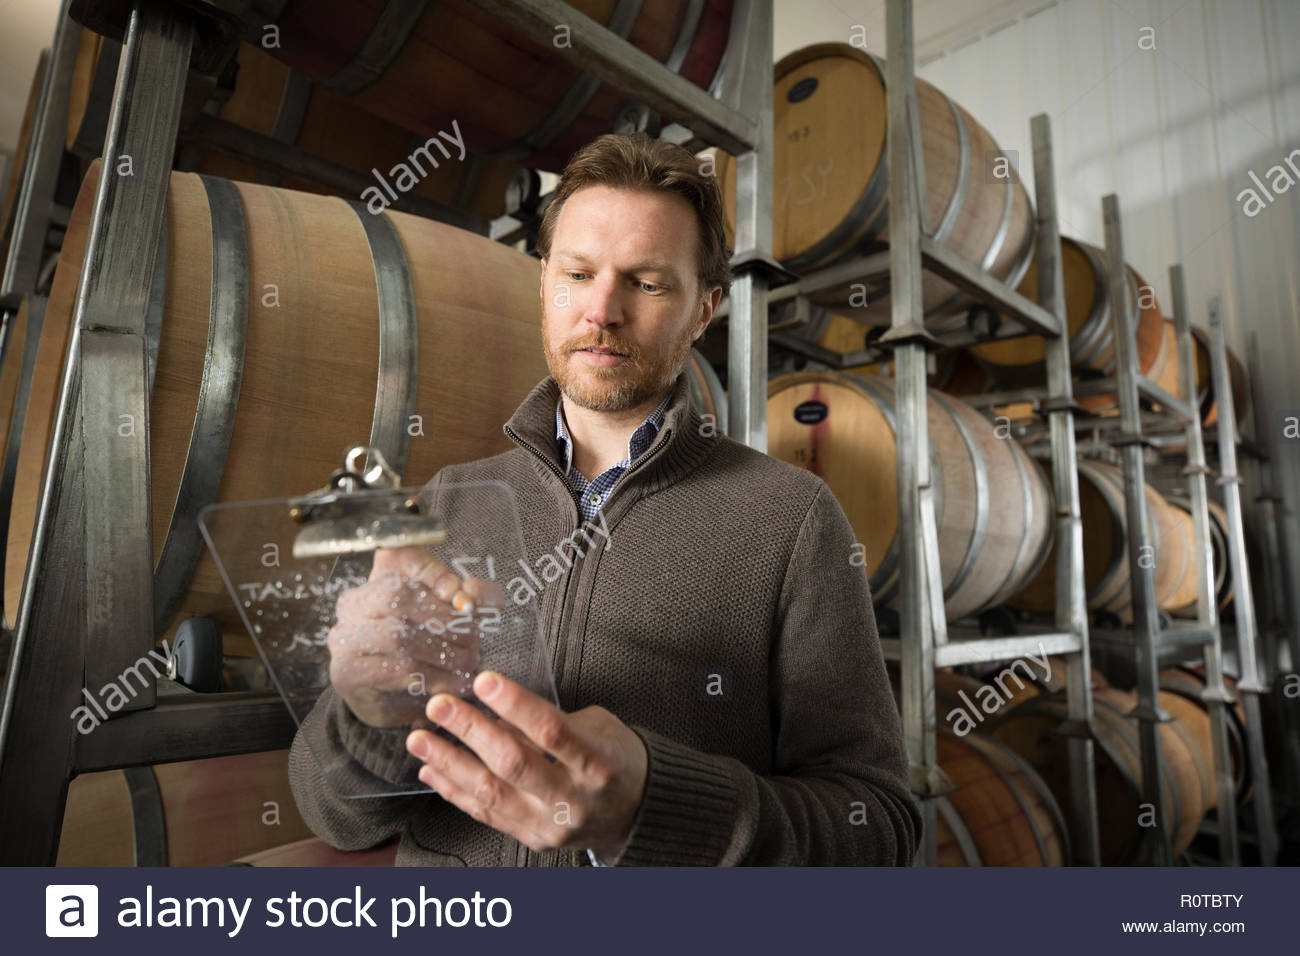 Winemaker with clipboard taking notes at vineyard Stock Photo